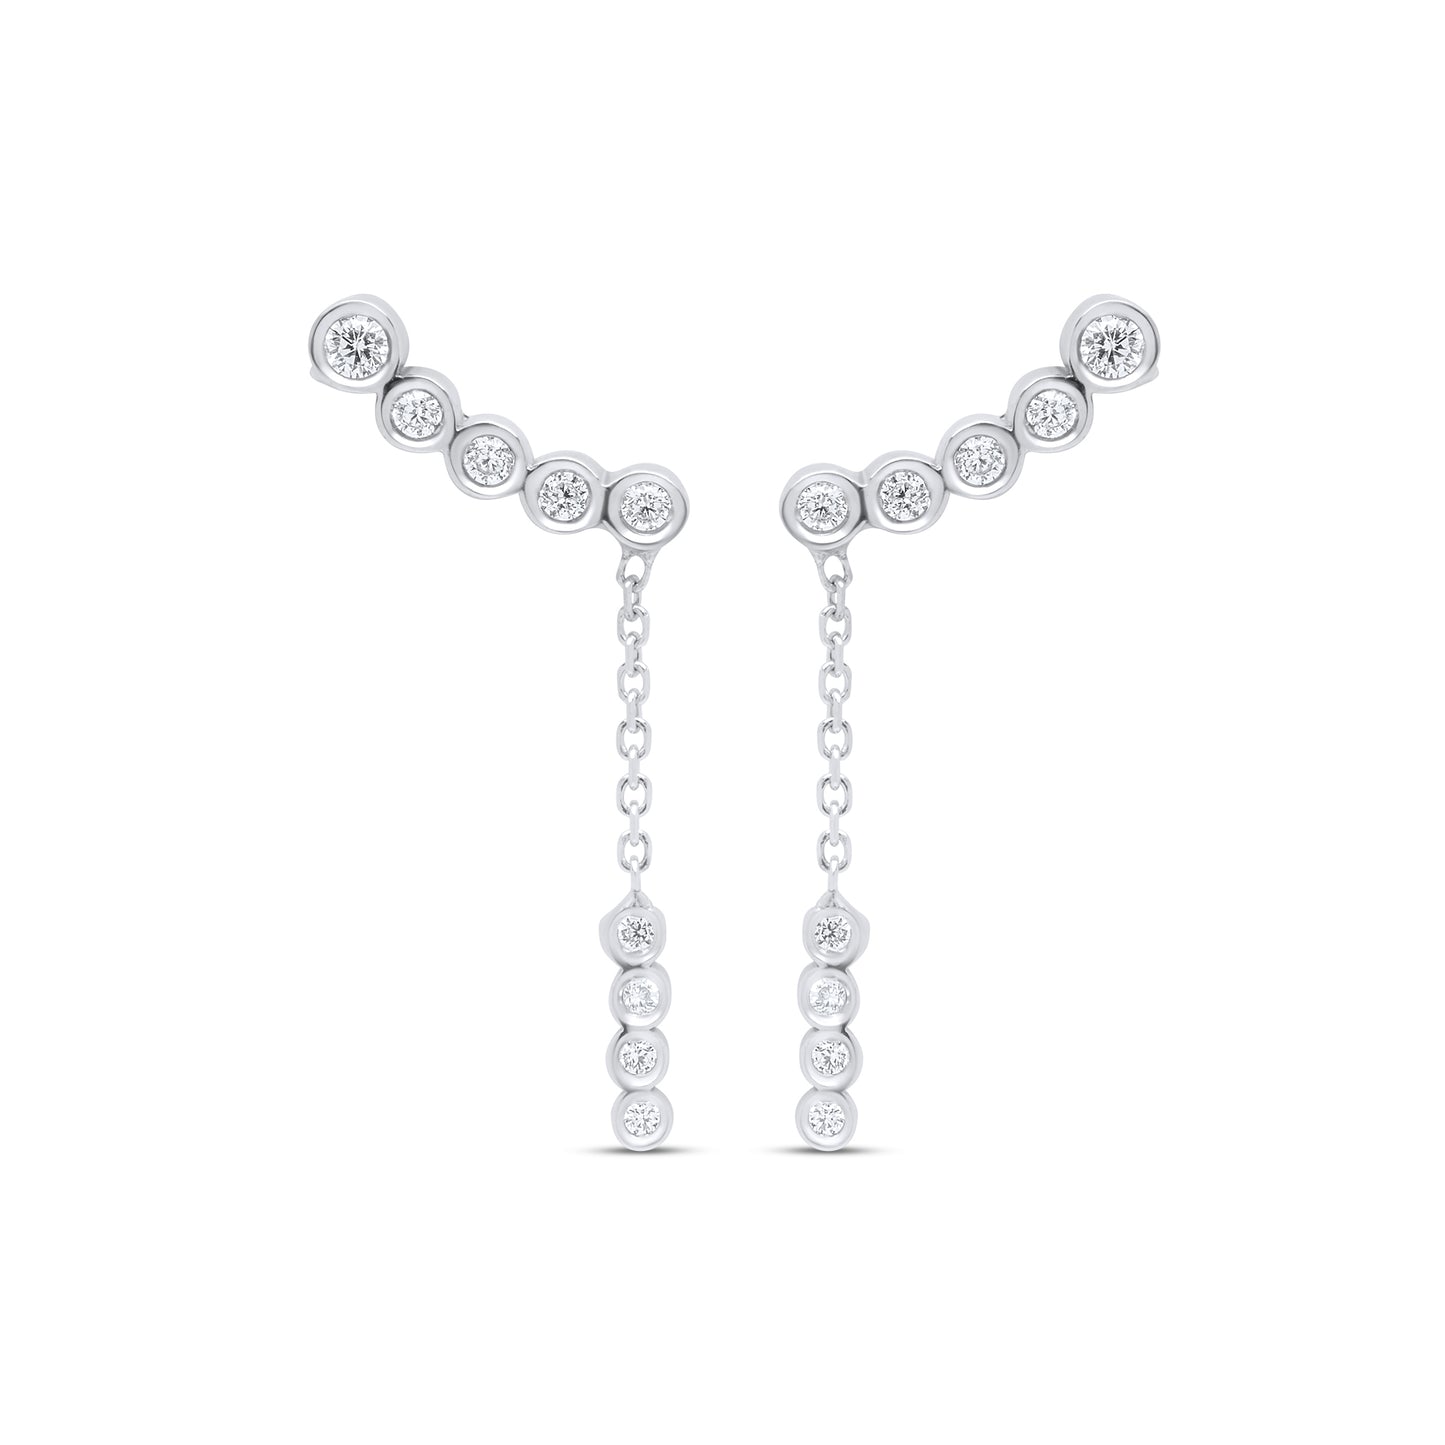 Smiley Stud with Chain 9k White Gold Earrings